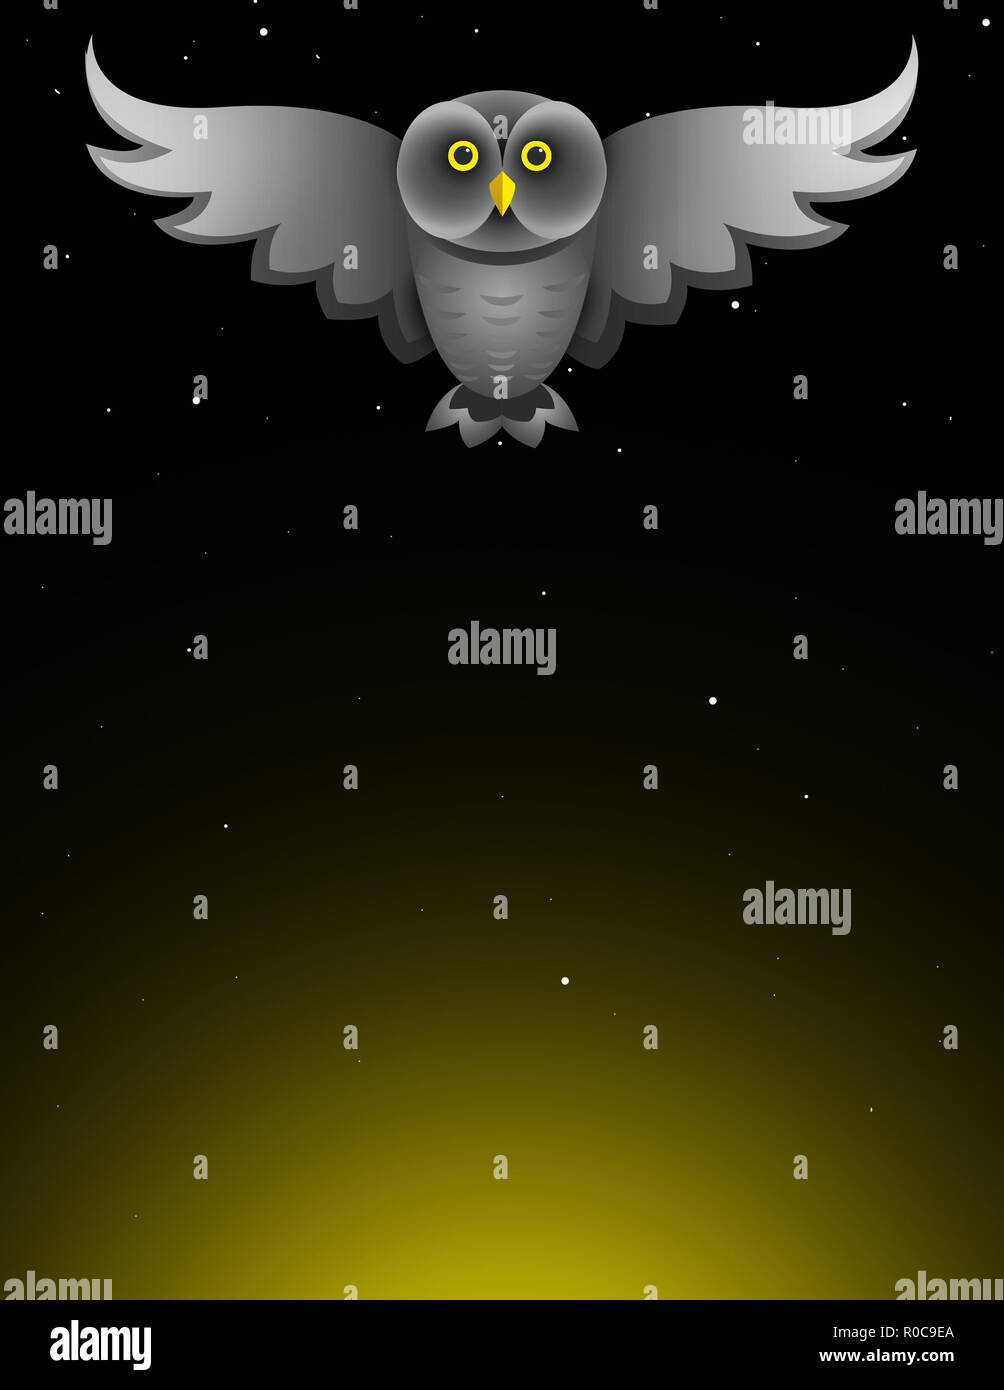 Illustration of a gray owl flying against a night sky Stock Photo